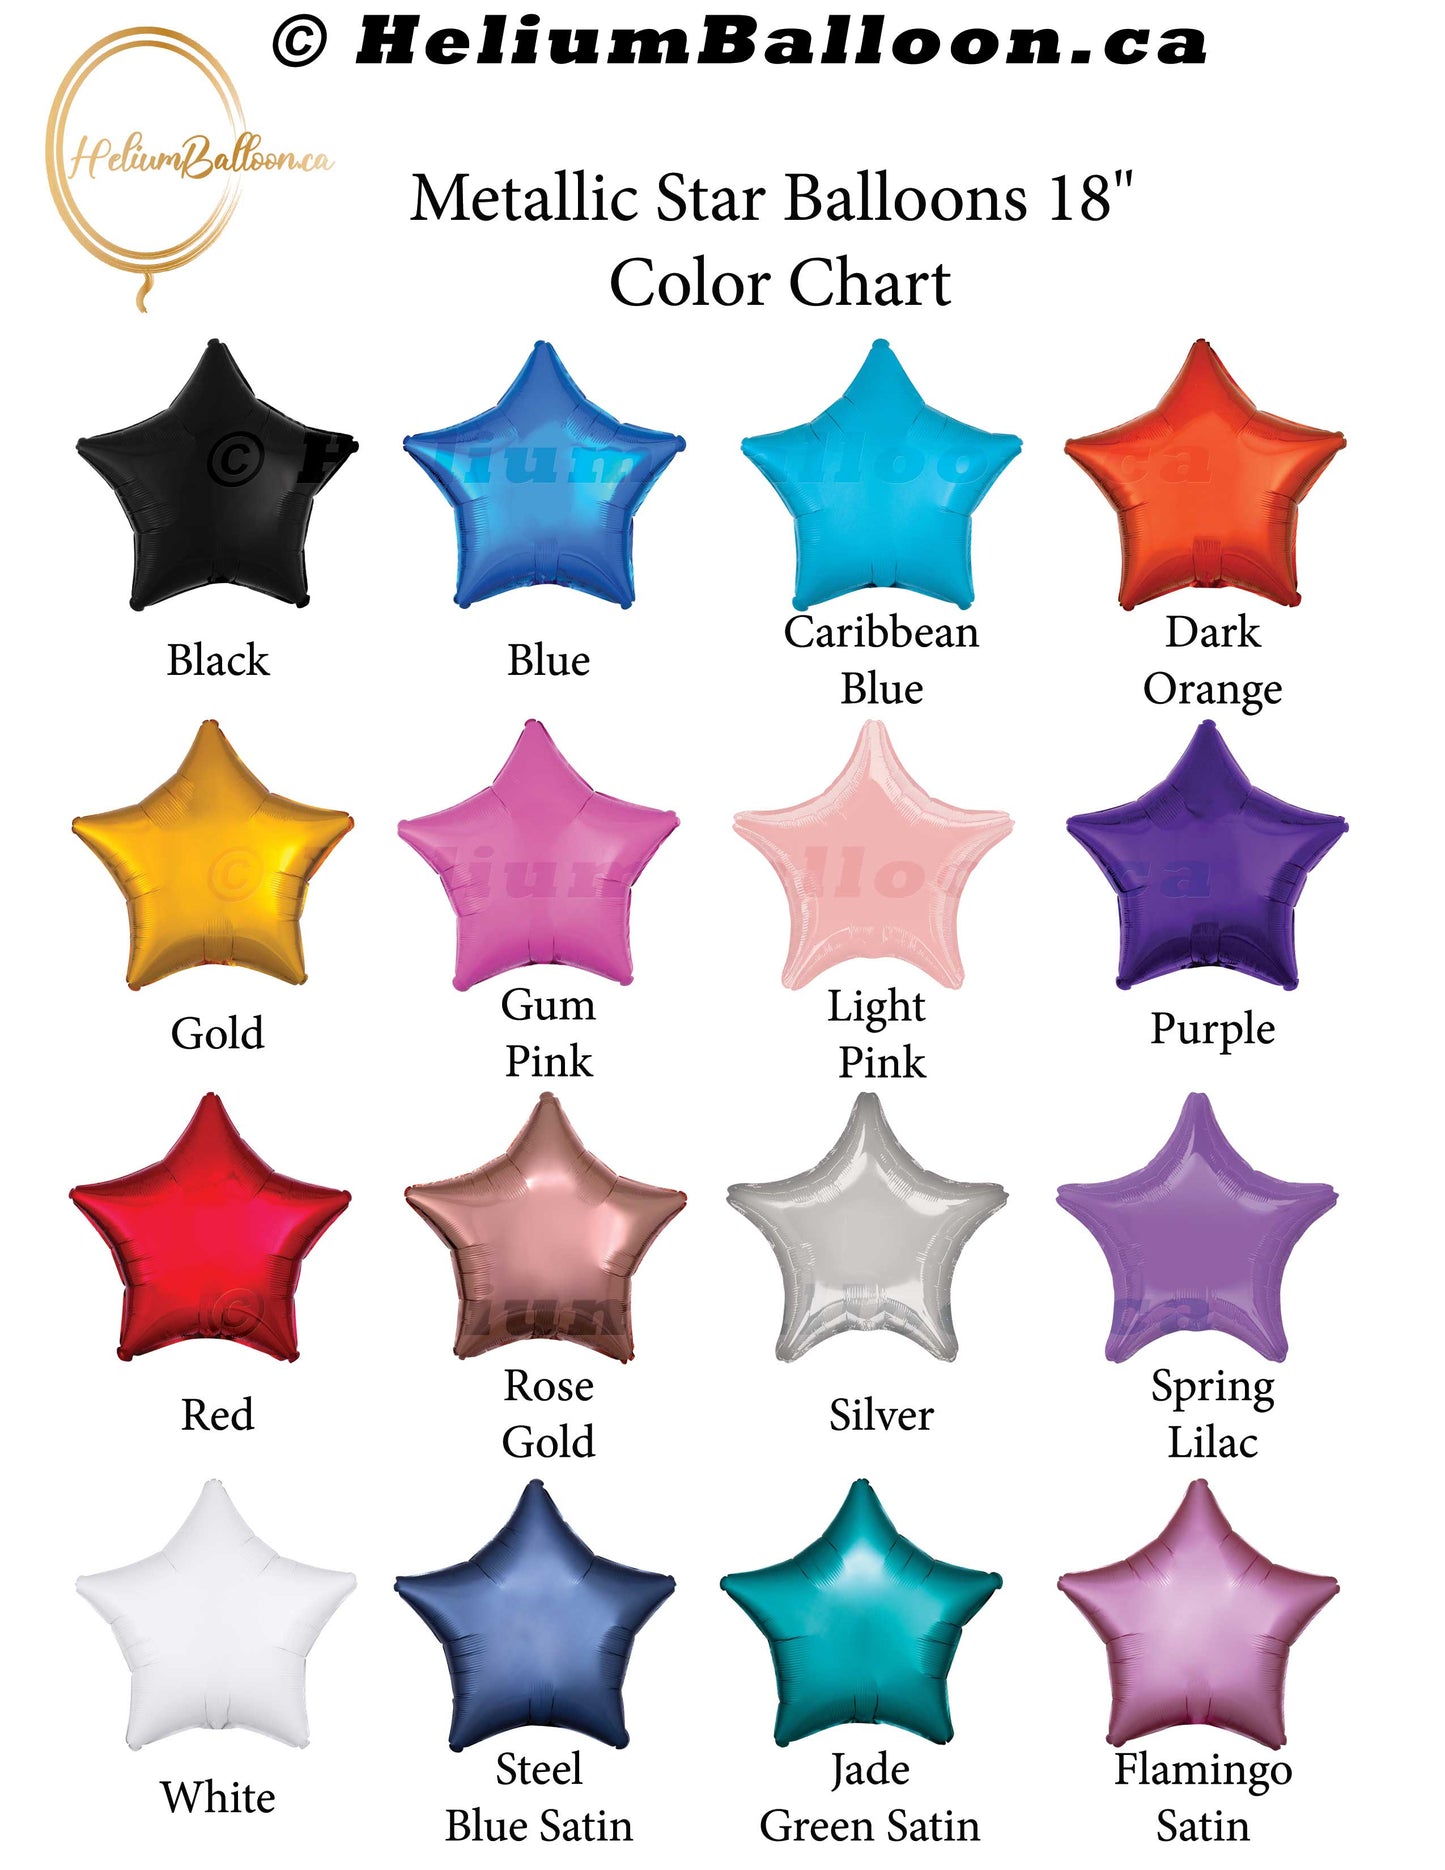 Make Your Own Bouquet Metallic Stars Balloons 18 inches (Color Choice)